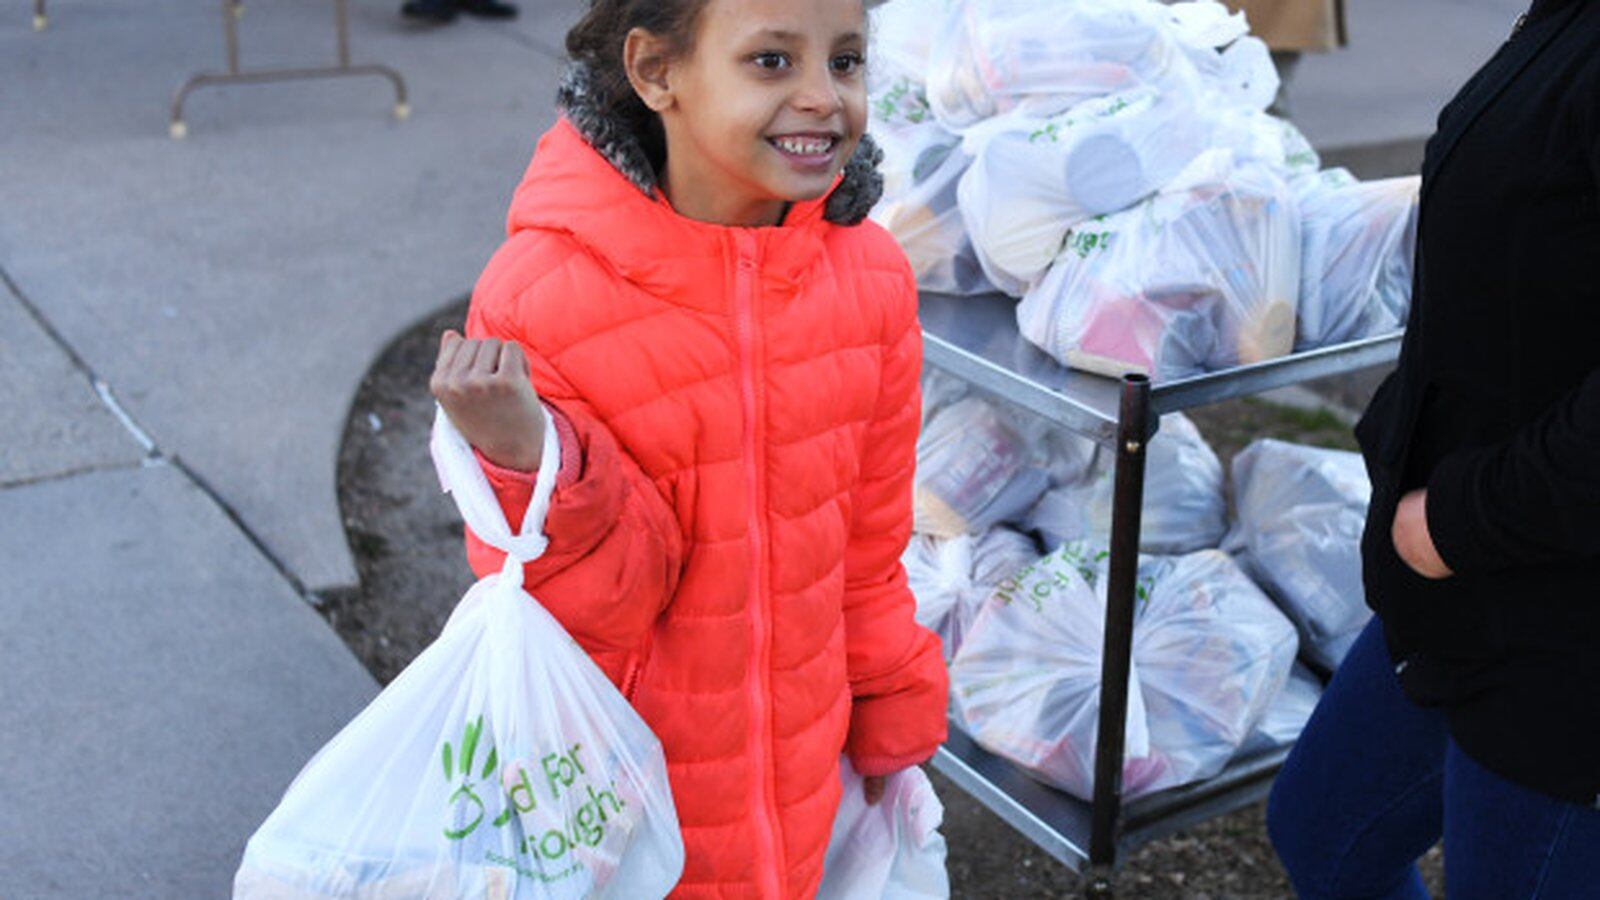 Da’vida Jones, 7, picks up a free meal and some extra food given out at Cowell Elementary on March 16, 2020 in Denver, Colorado.